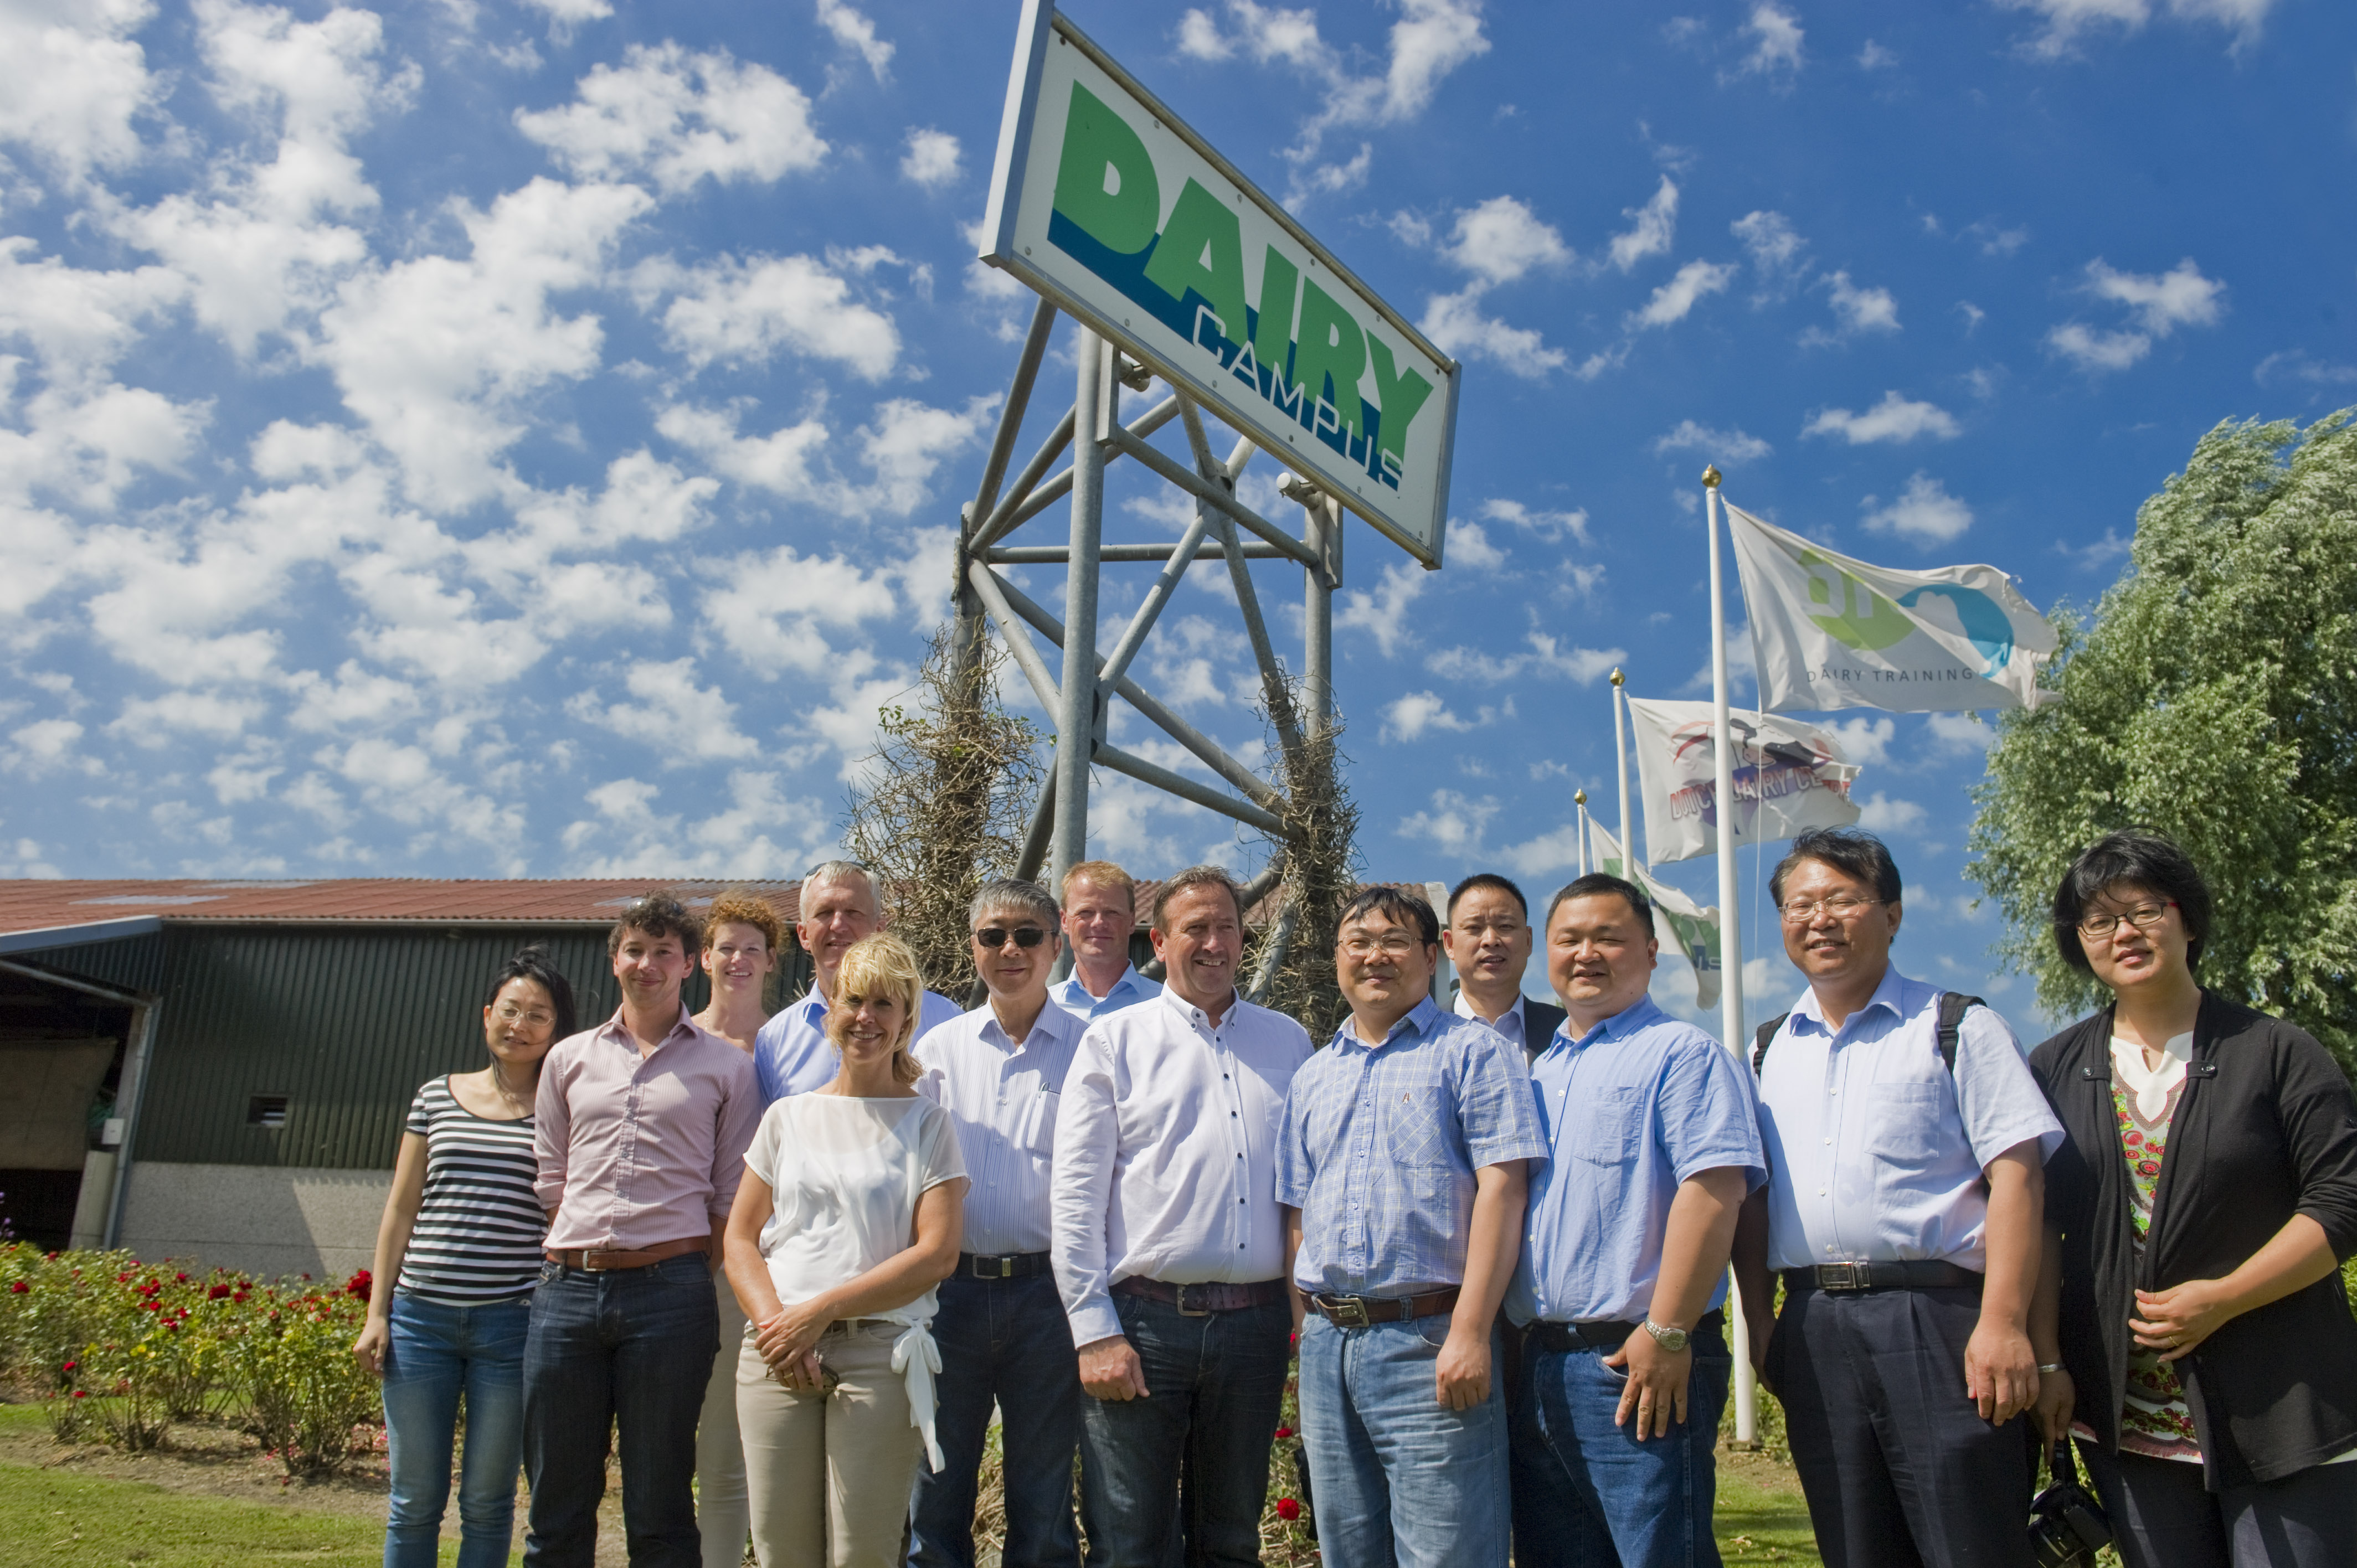 Chinese delegations learning about the Dutch dairy industry during the first Dutch Dairy Experience (2014) at the Dairy Campus in Leeuwarden. Kees de Koning (light blue shirt, centre) and to his right Professor Li Shengli, director of the Sino-Dutch Dairy Development Centre and professor at China Agricultural University. Photo: Dairy Campus WUR